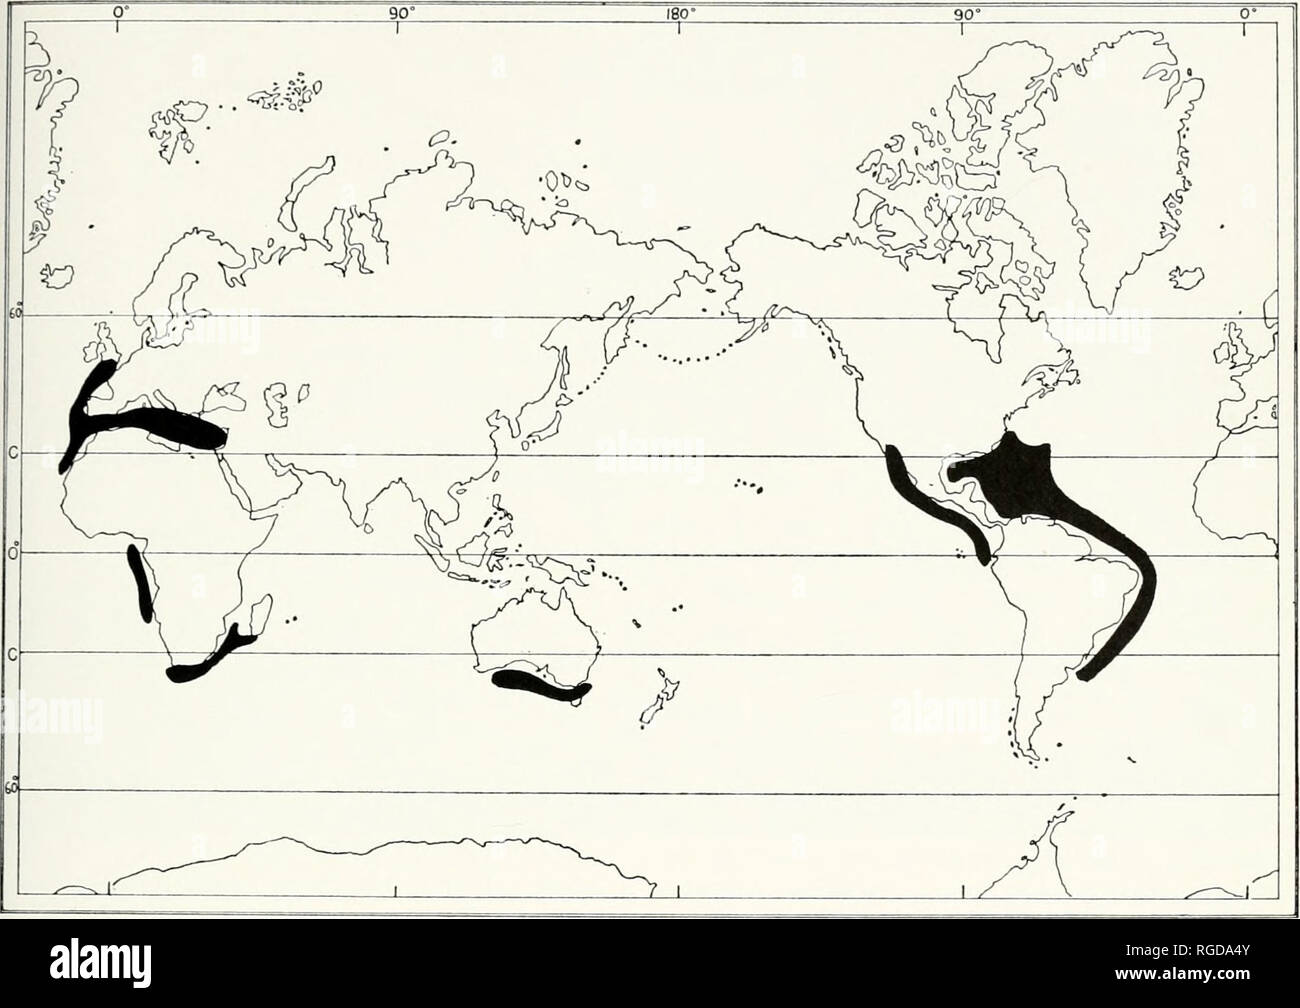 . Bulletin of the Museum of Comparative Zoology at Harvard College. Zoology. South African Tellina • Boss 121. Map 4. The distribution of species of Eurytellina. The species include: in South Africa, o/fredens/s and prismatica; in West Africa, madagascariensh; in Australia, albmella and roseola; In the northeastern Atlantic Ocean and Mediterranean Sea, incarnafo; in the western Atlantic, pun/ceo and allies [alternata, tayloriana, angulosa, nitens, trinitatis, guildingii, vespuci- ona, and lineata); and, in the eastern Pacific, slmulam and allies (/ocer;dens, hertteini, laplata, eburnea, rubesc Stock Photo